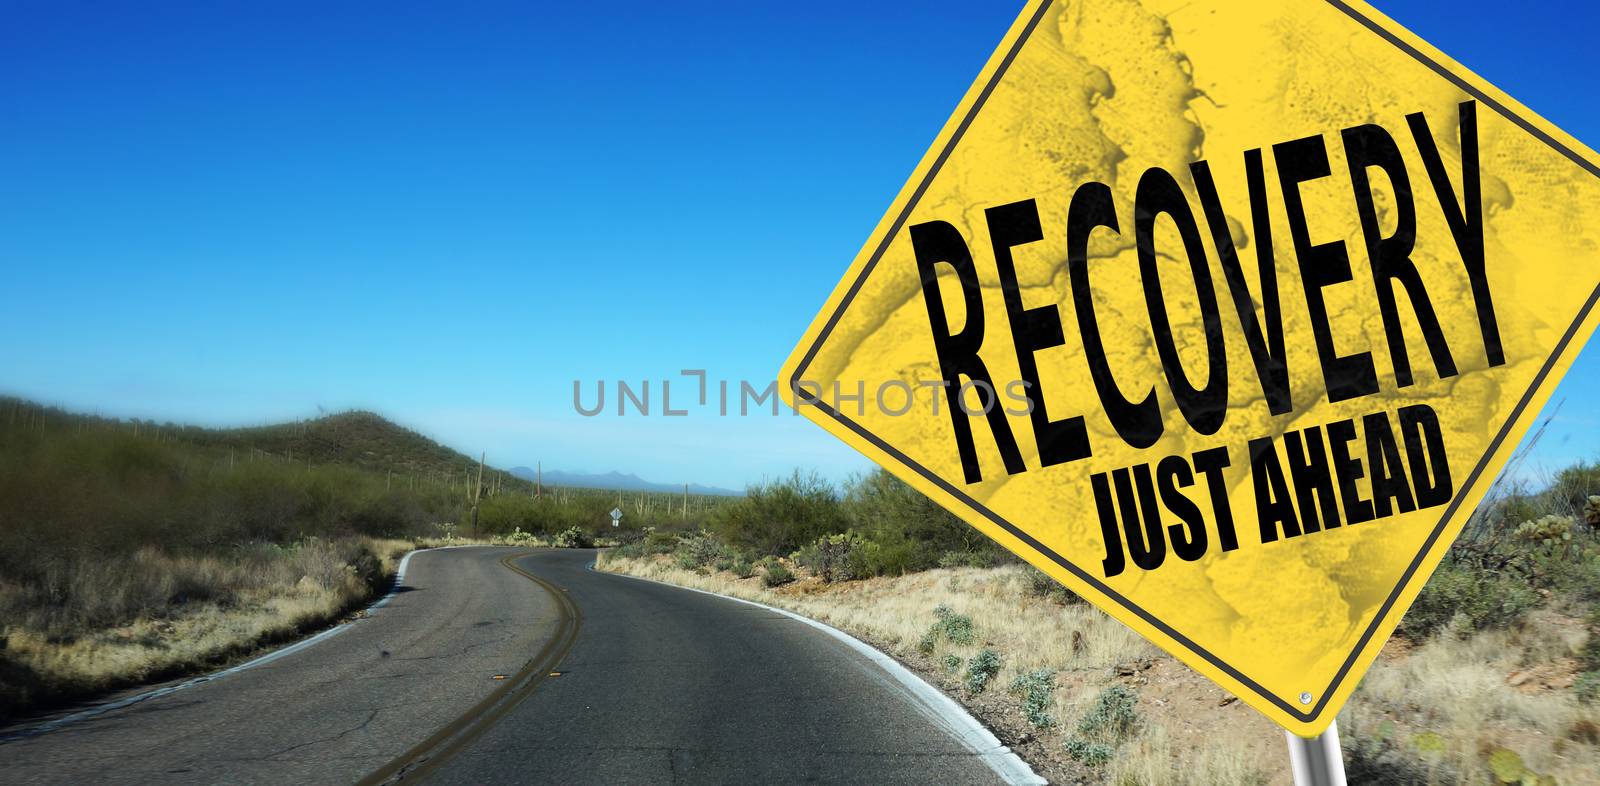 Recovery Just Ahead sign by tang90246